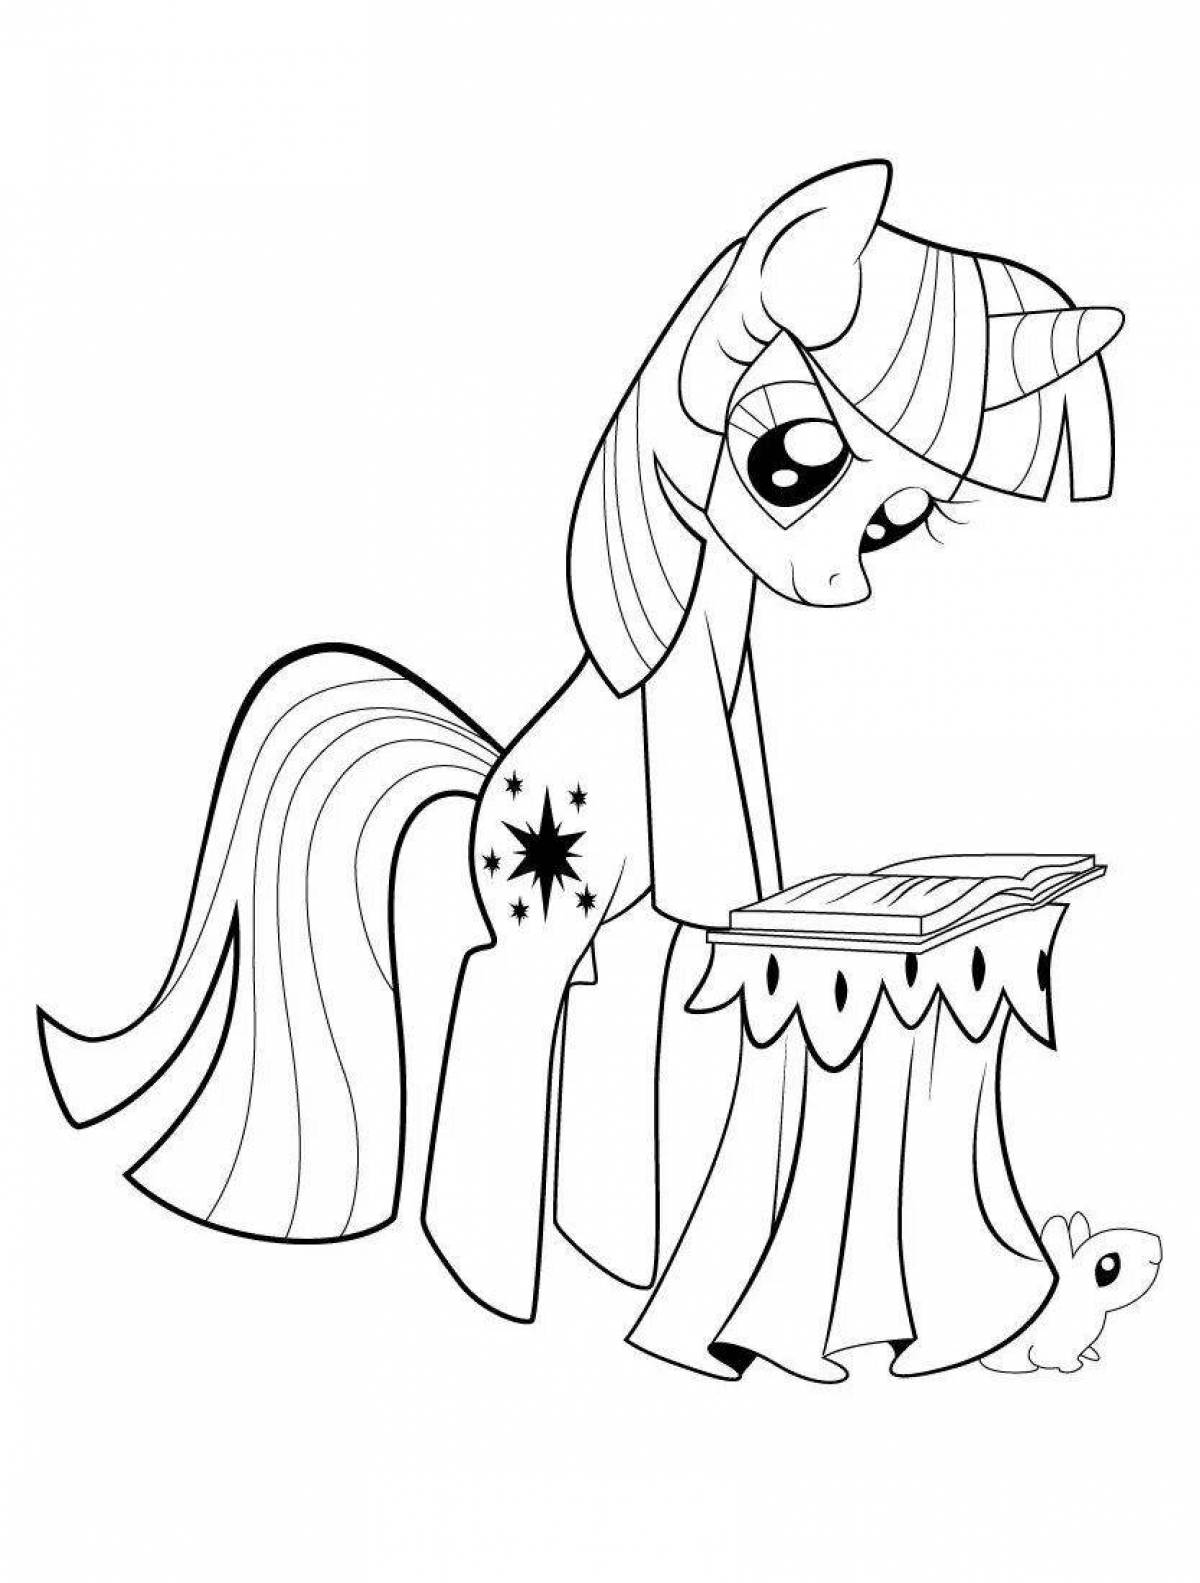 Coloring page amazing sparkle little pony